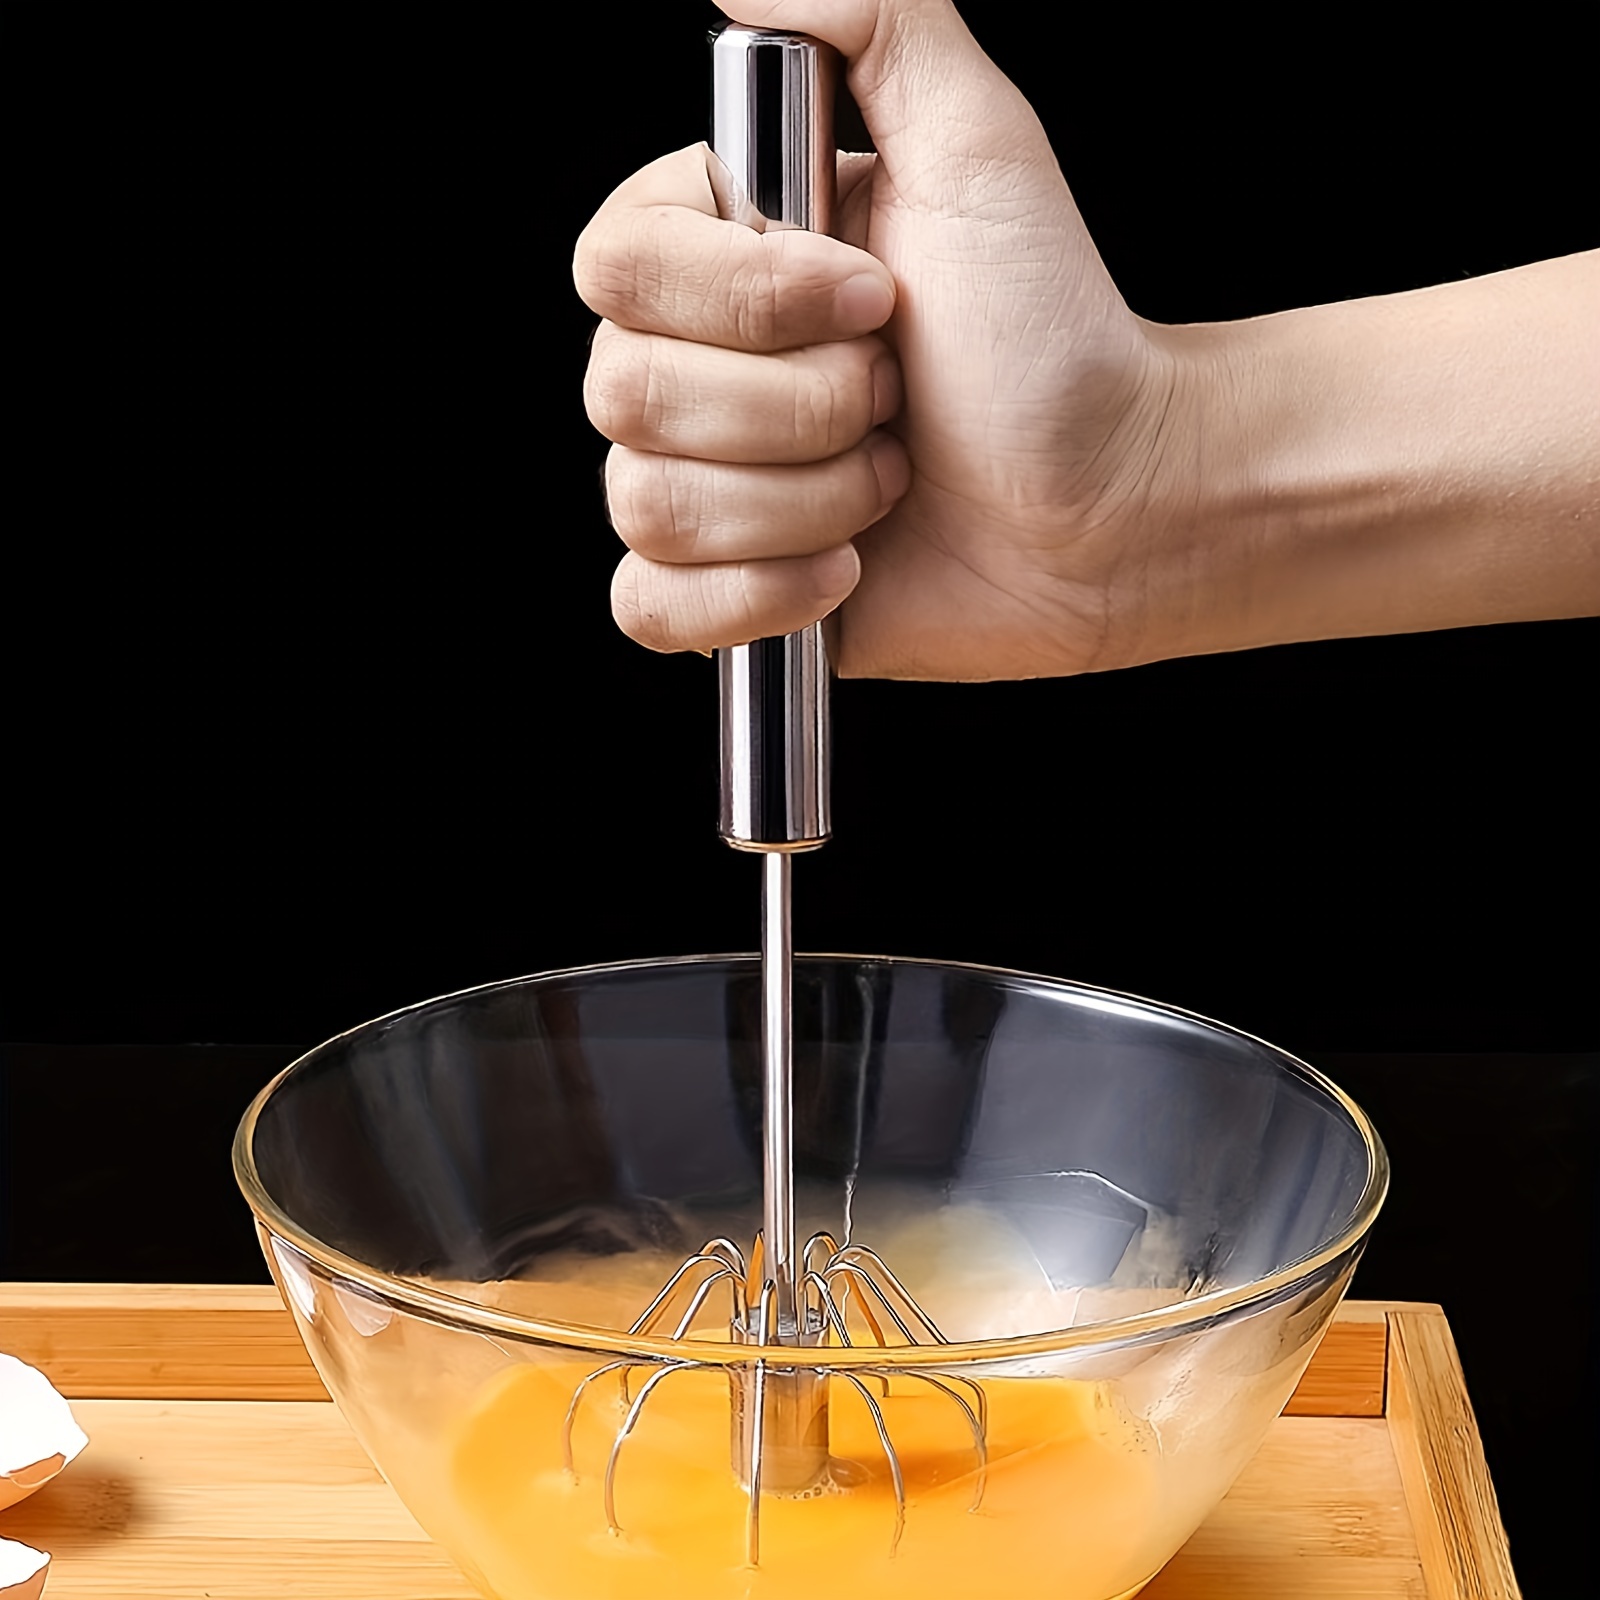 Stainless Steel Cream Mixer Manual Press Mixer Egg Beater Frother Kitchen  Mixing Tool